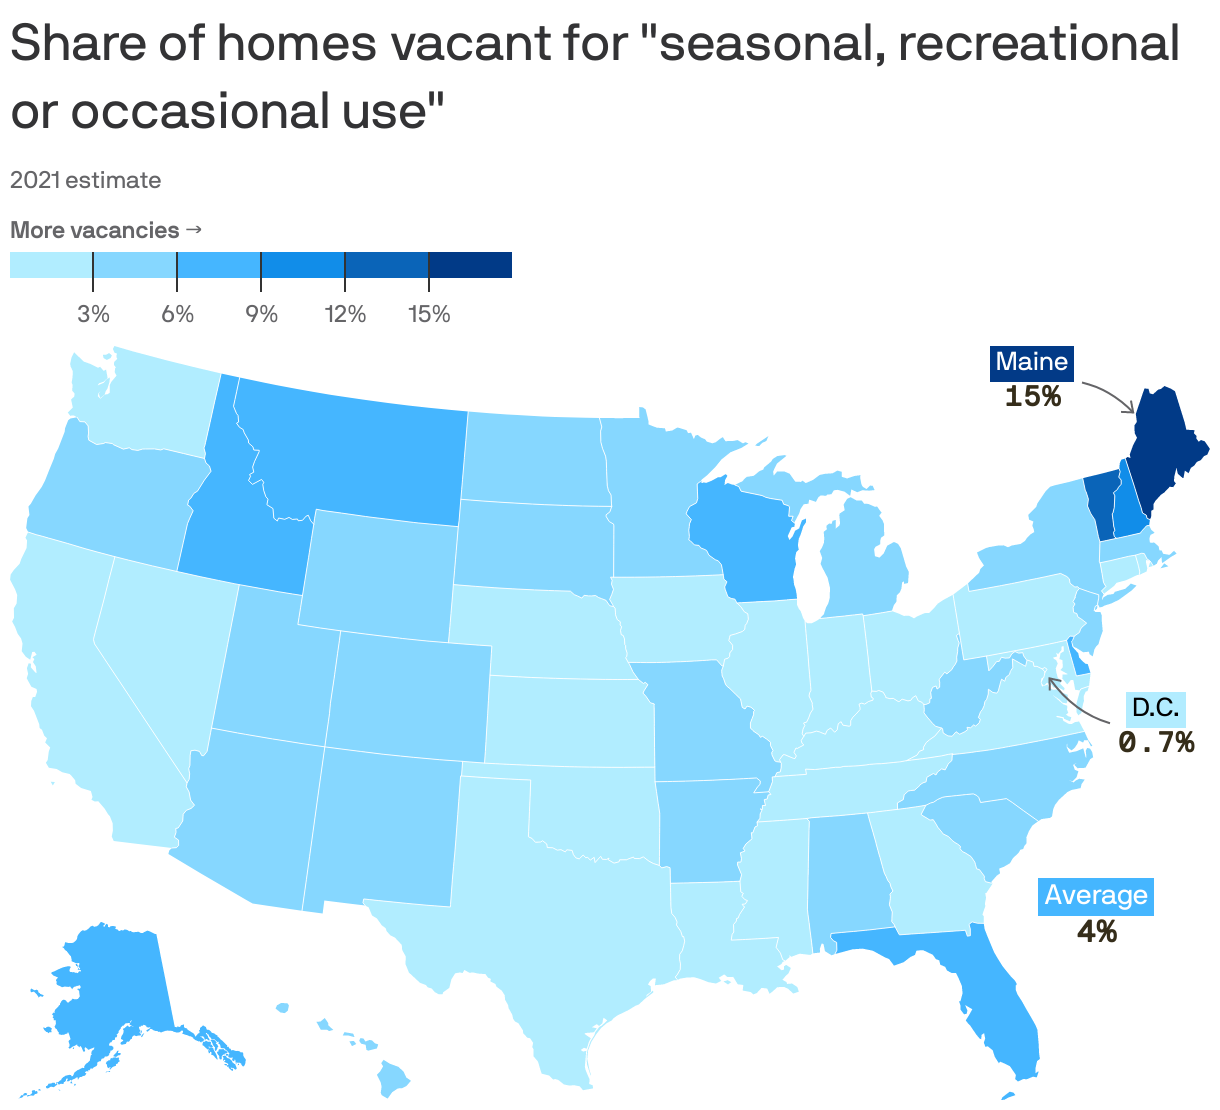 Share of homes vacant for "seasonal, recreational or occasional use"